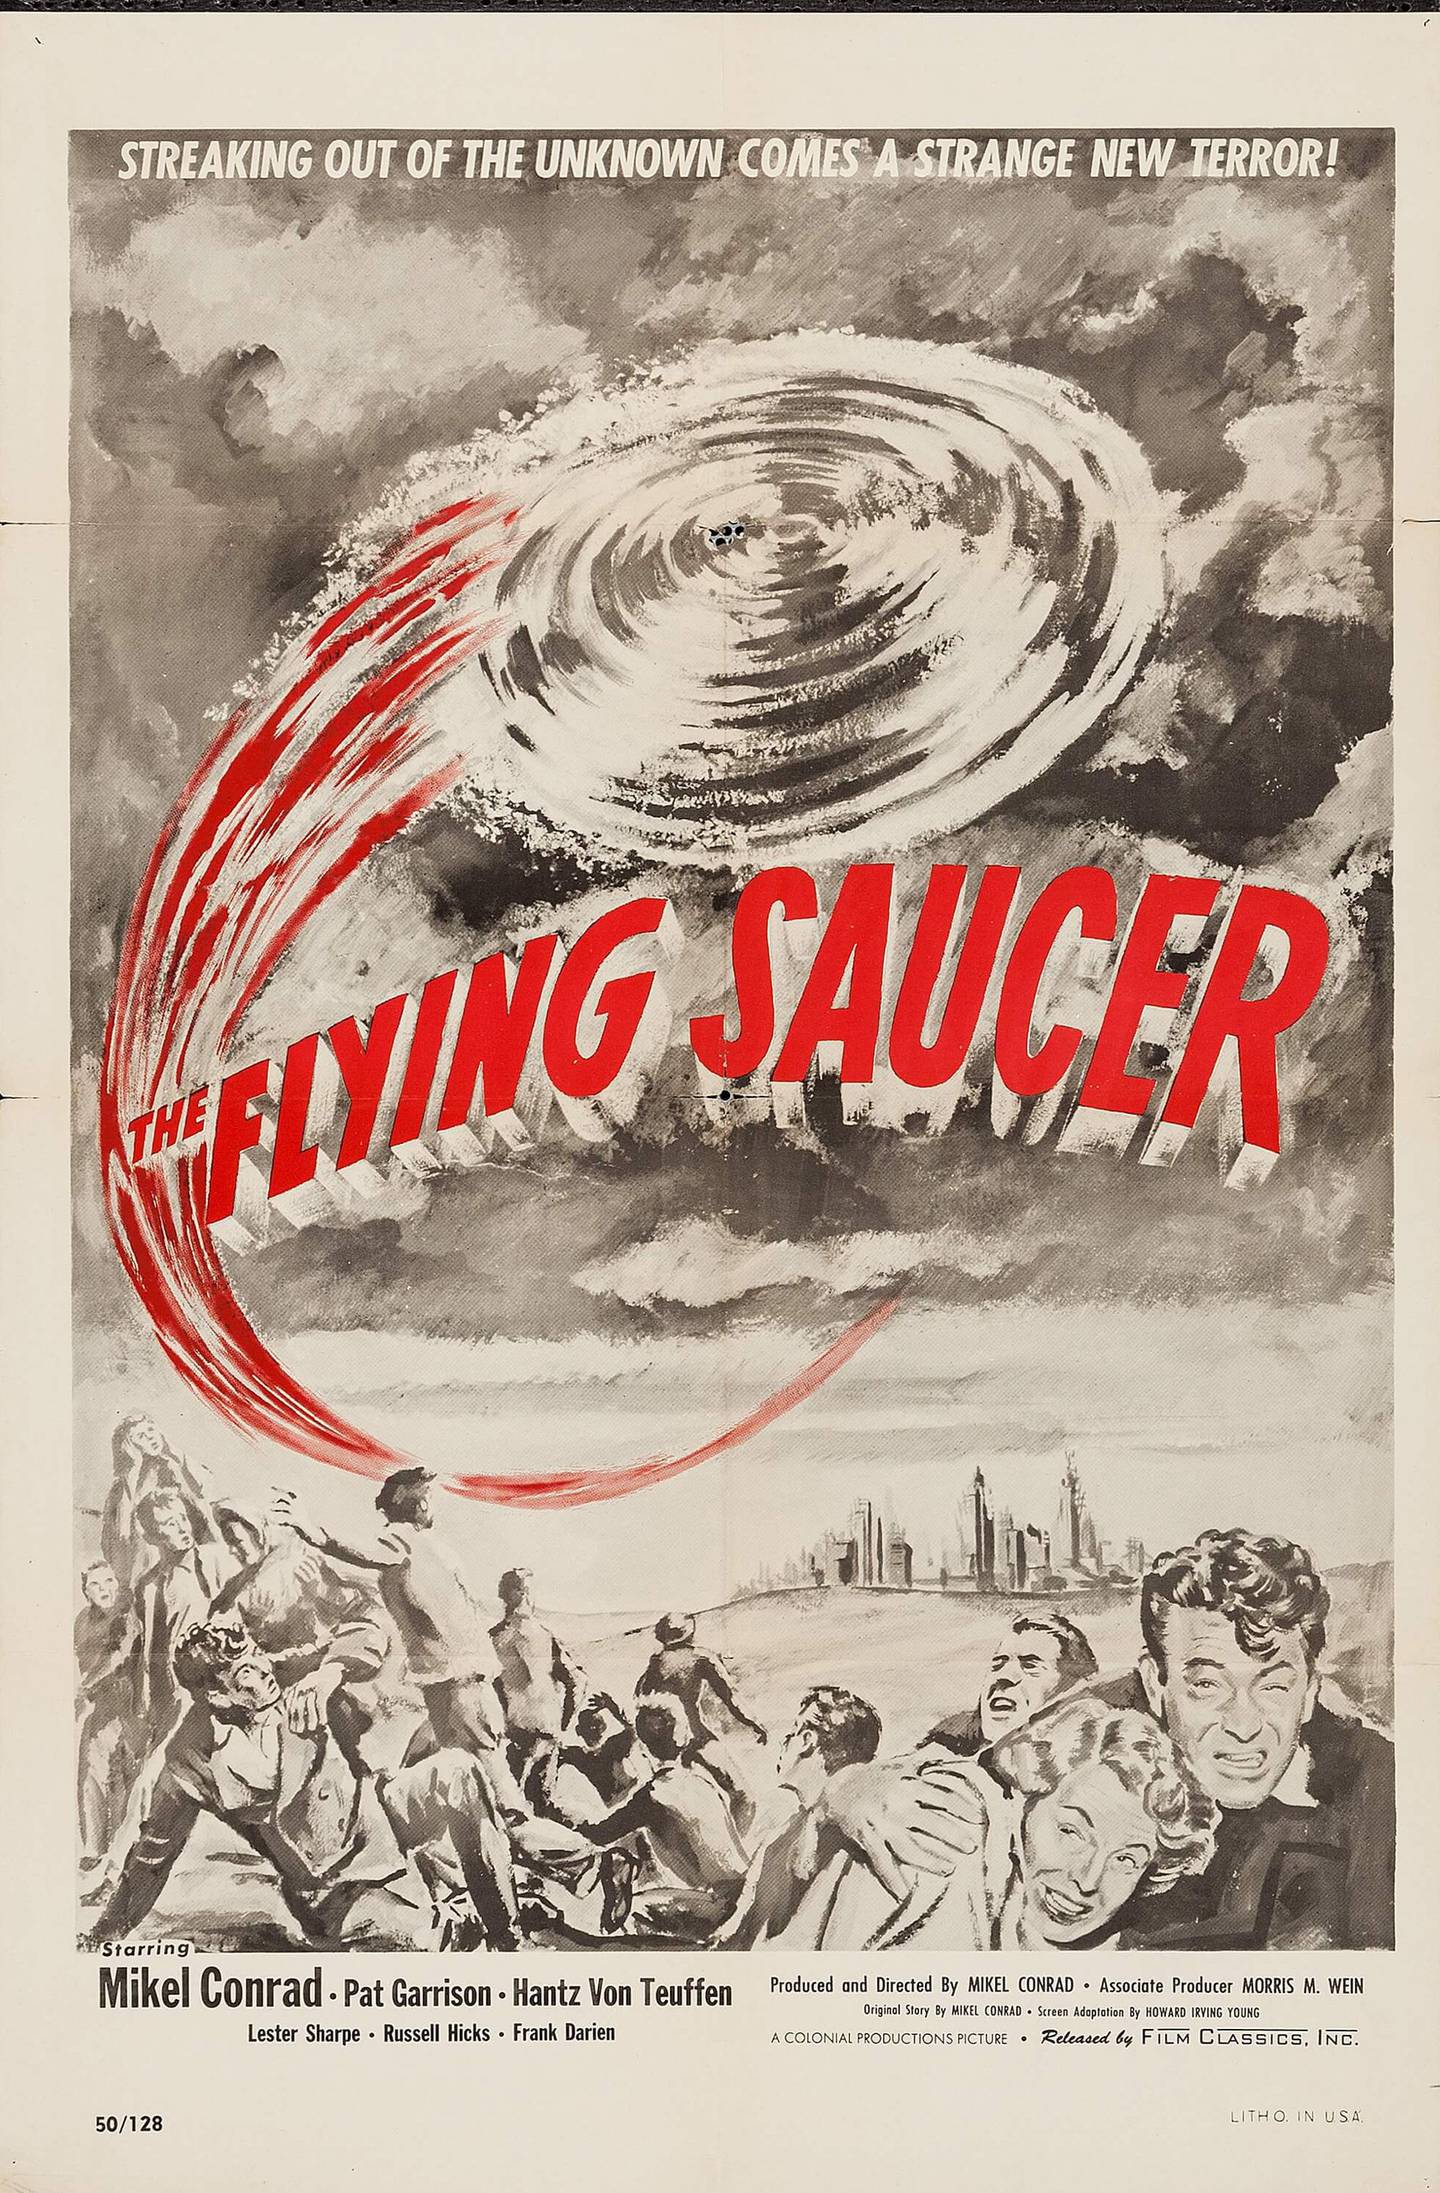 A movie poster for "The Flying Saucer"